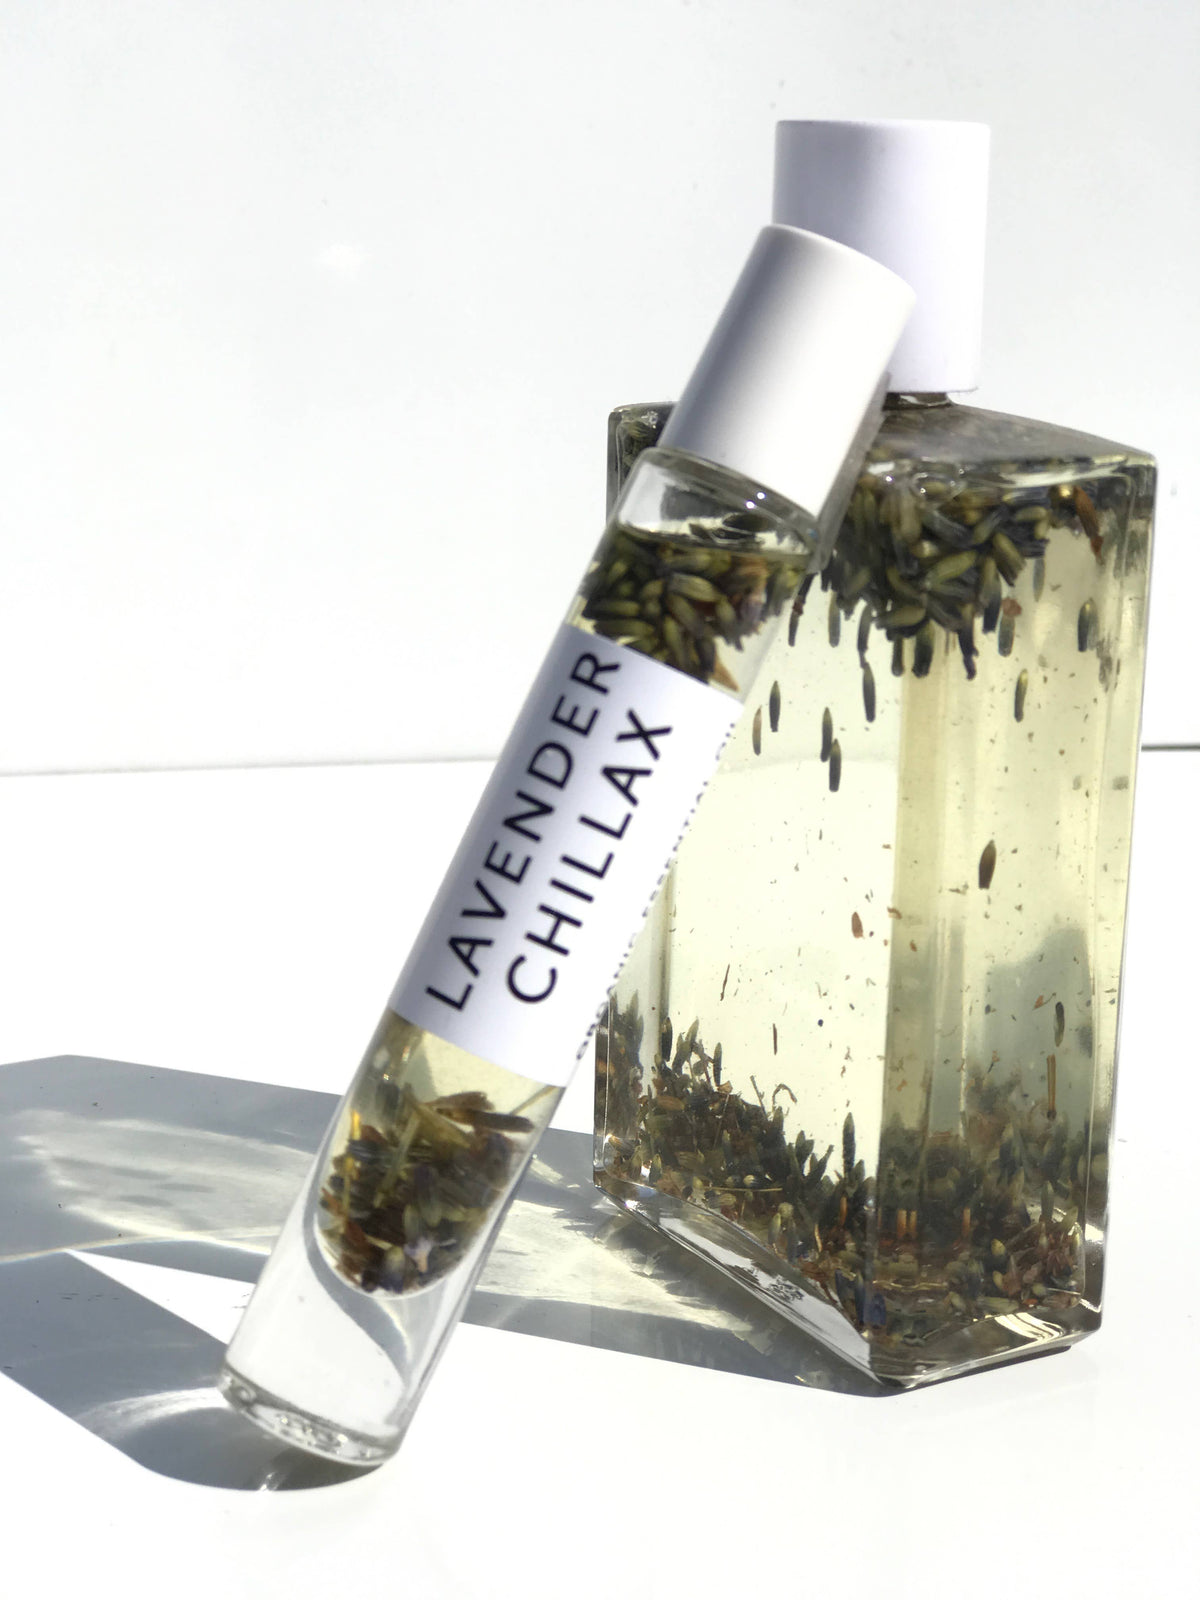 A clear glass bottle containing Hydra Bloom Beauty Lavender Chillax Organic Essential Perfume oil with lavender blossoms, labeled "lavender chillax," stands against a white background, with sunlight casting its shadow.